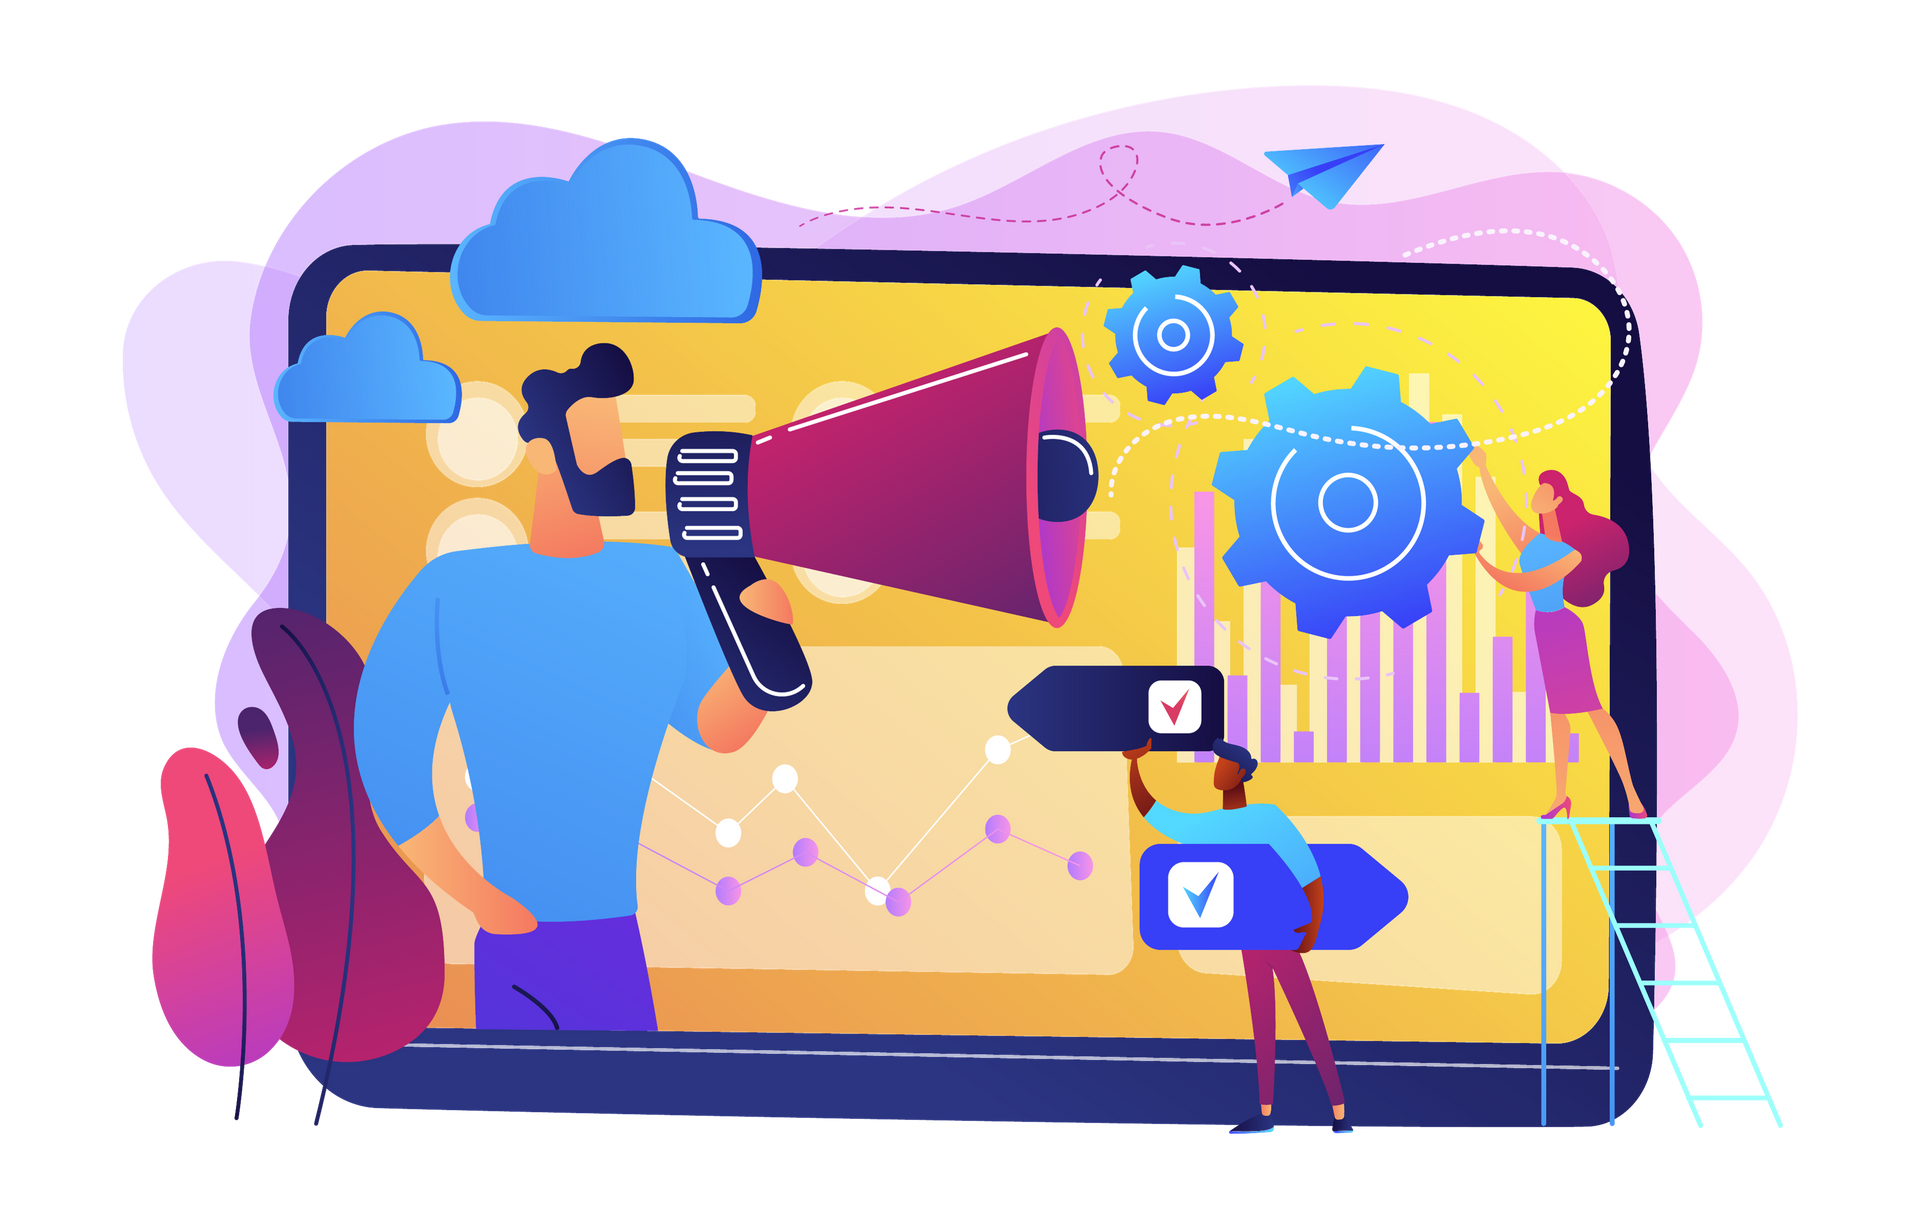 Vector Illustration of Digital Marketing Campaign with Megaphone